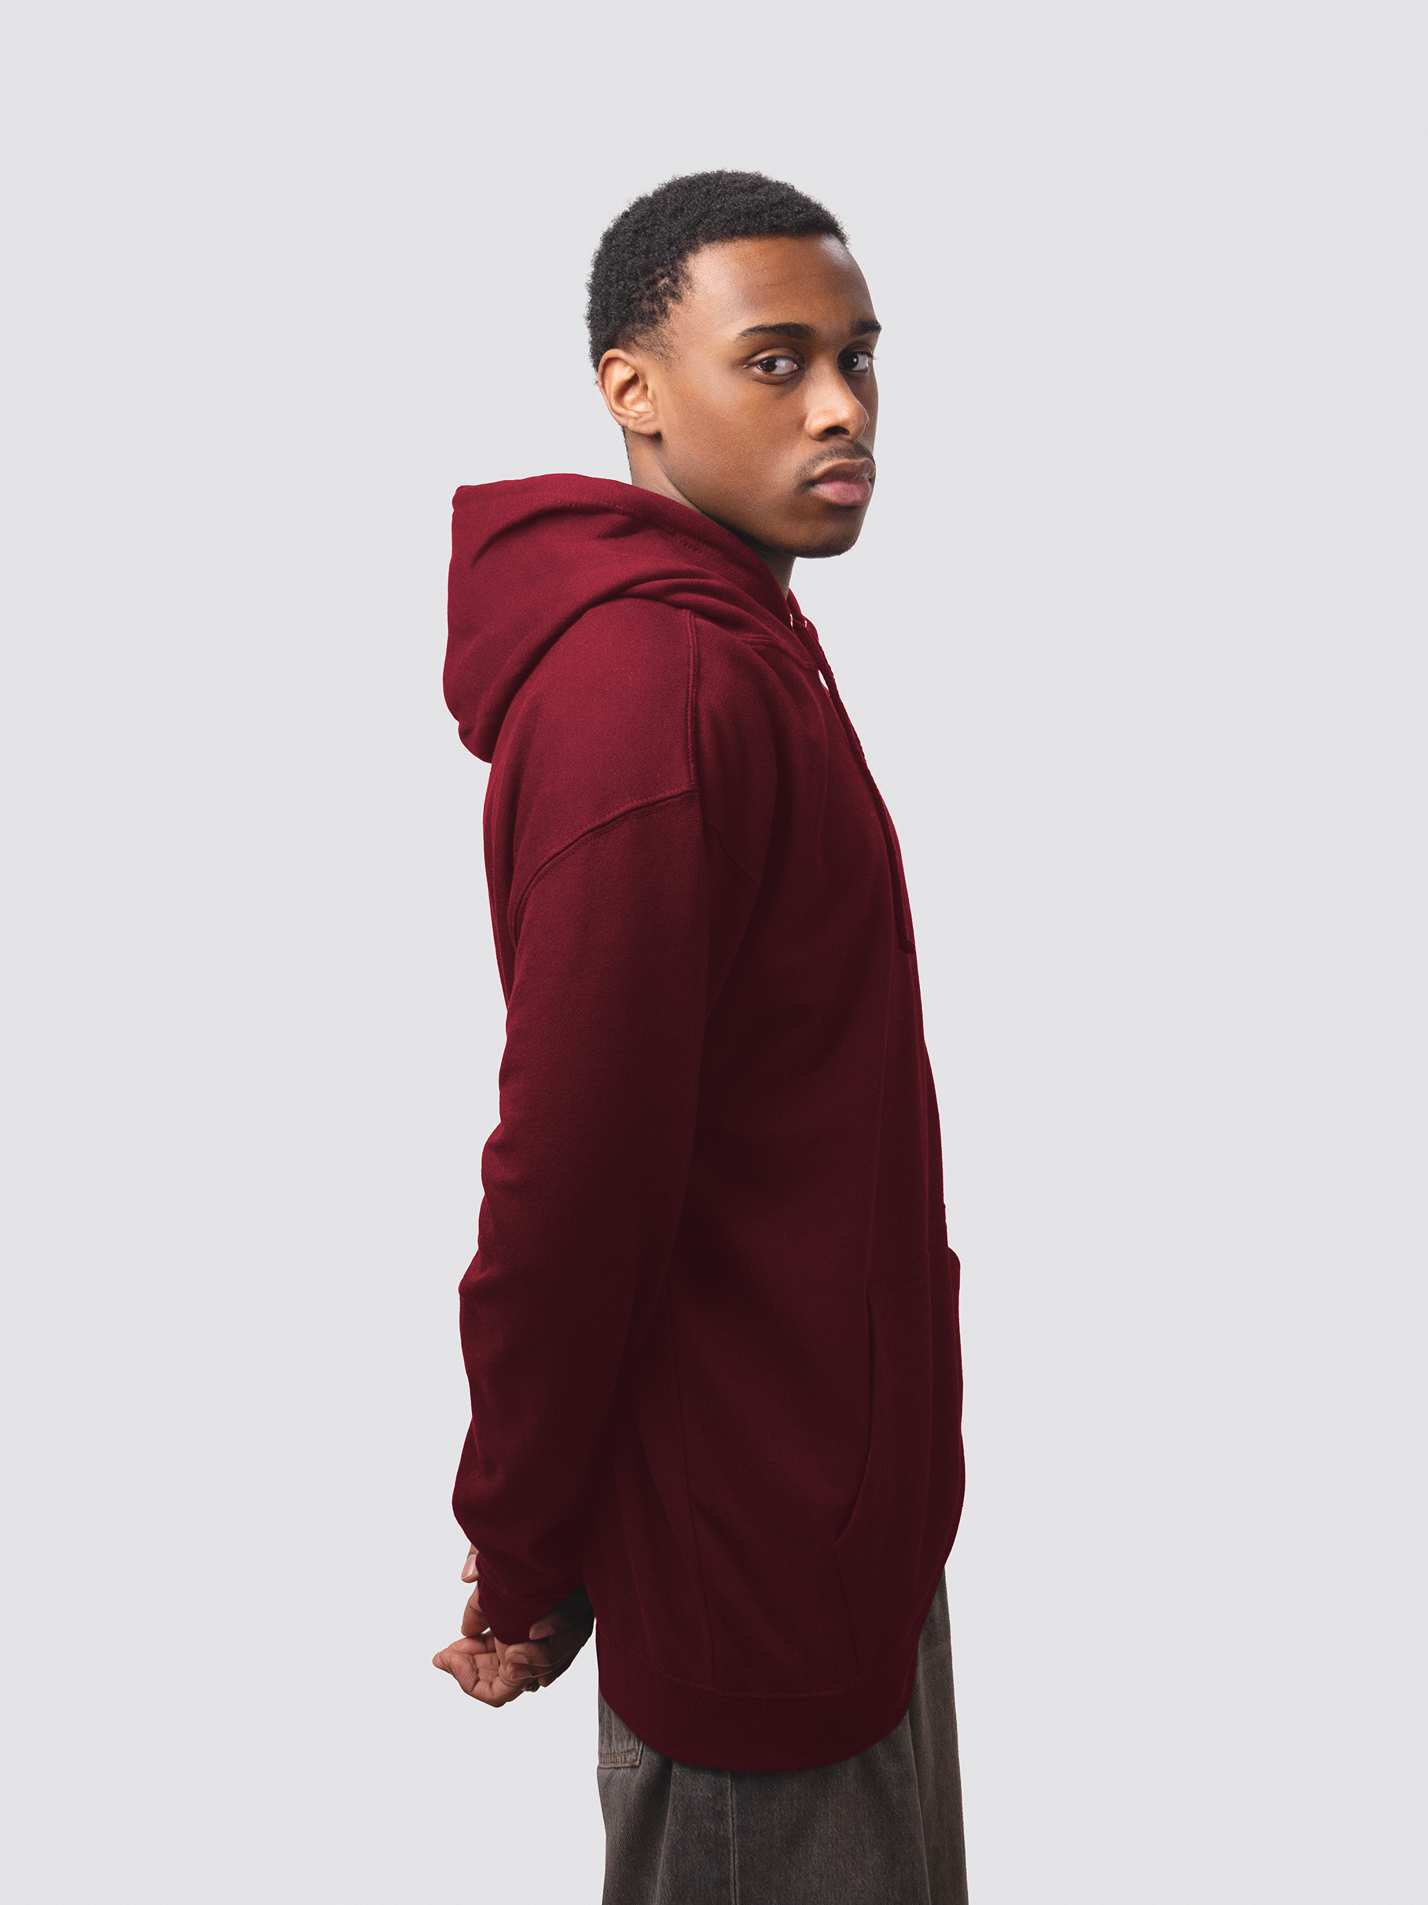 Kellogg College hoodie, made from burgundy cotton-faced fabric